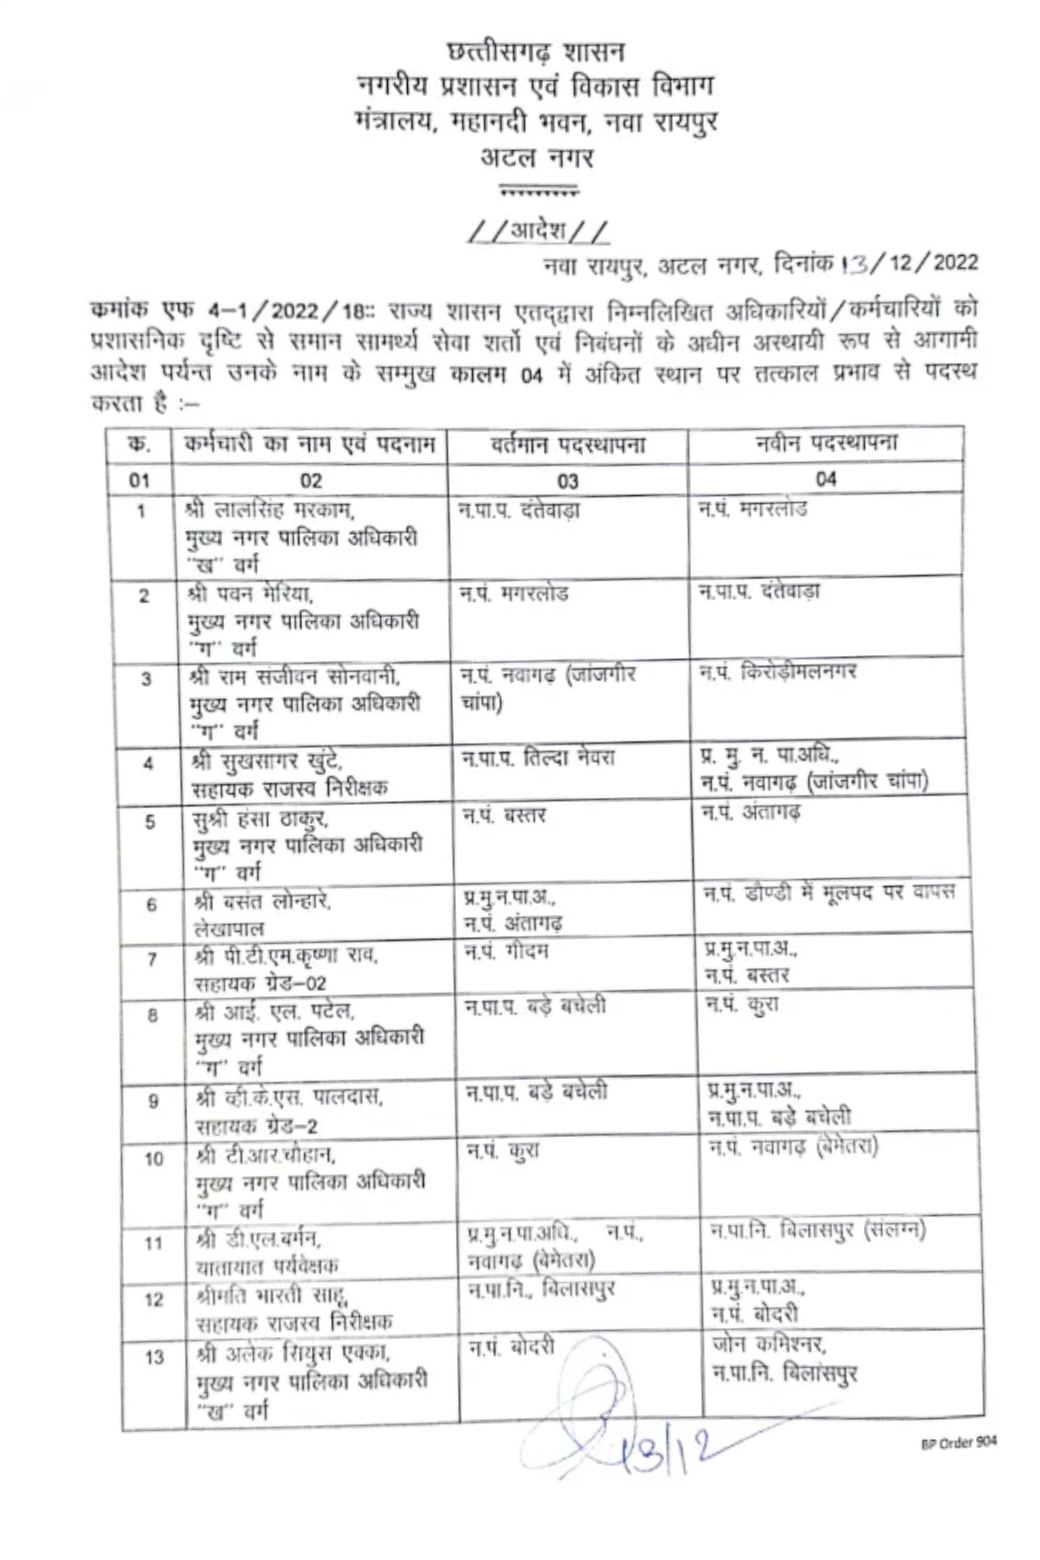 Transfer breaking, transfer list of 98 officers and employees, Urban Administration Department, Chief Municipal Officer, Engineer, Assistant Revenue Inspector, Chhattisgarh, Khabargali